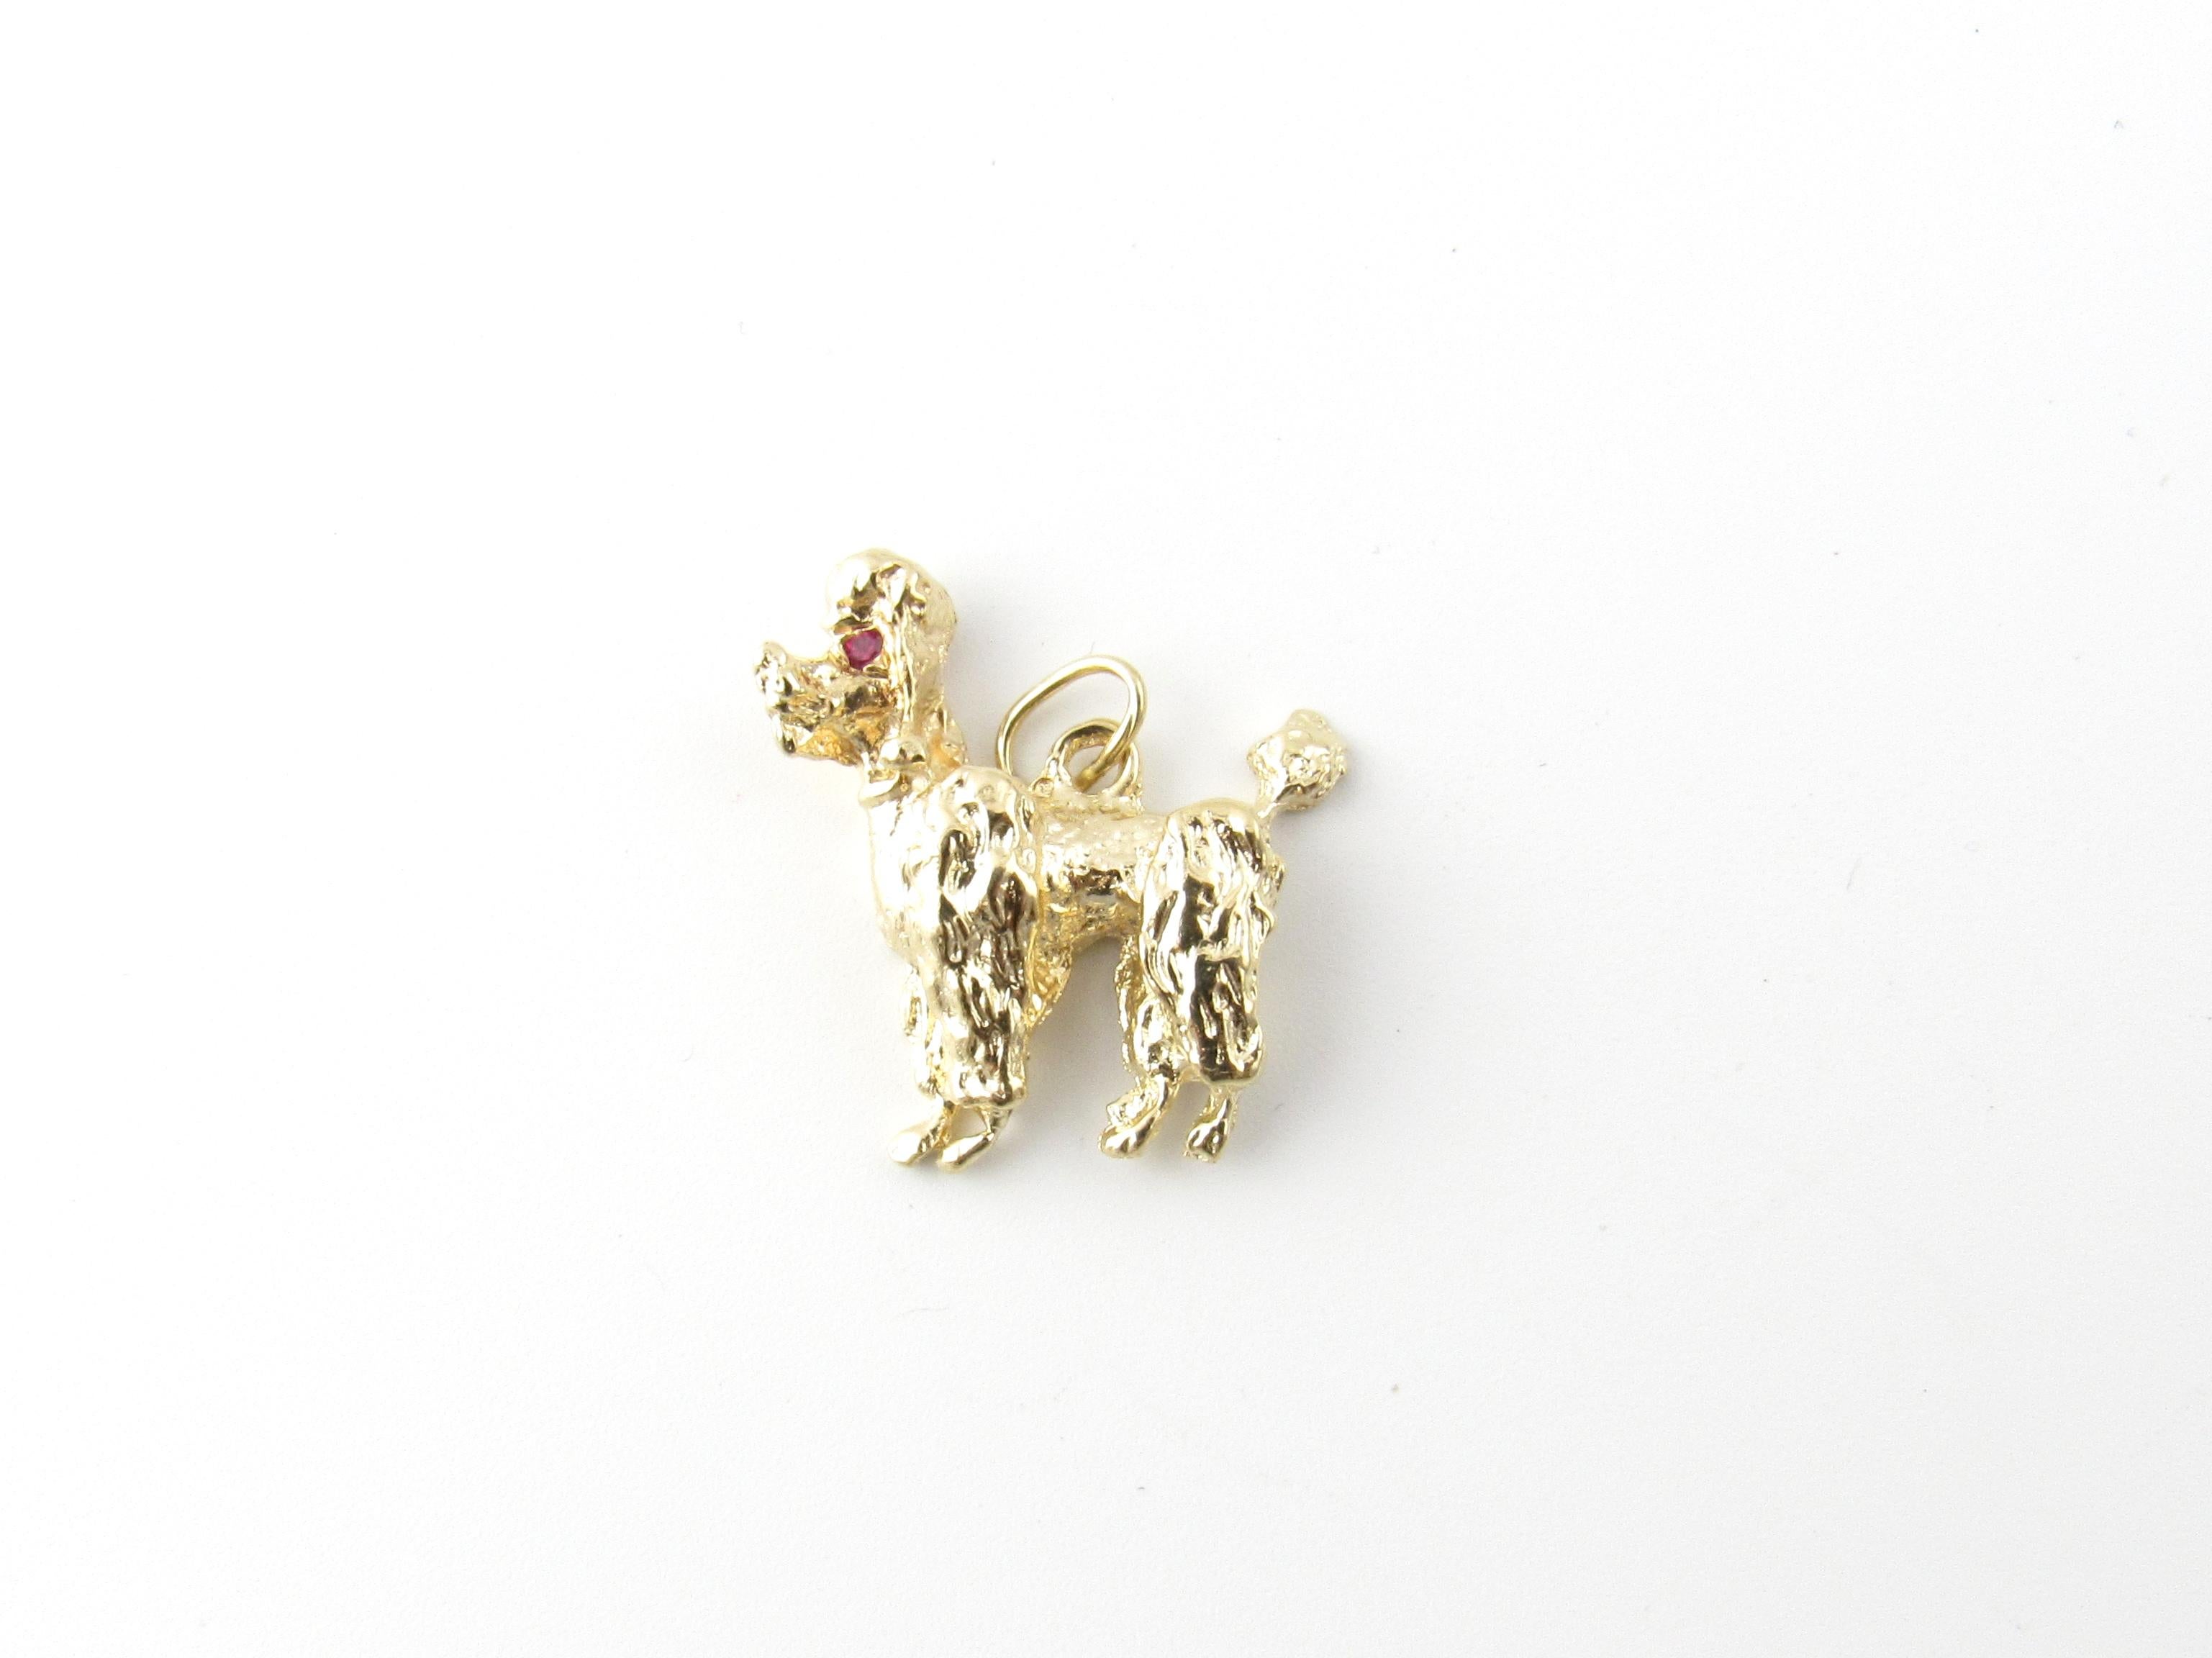 14 Karat Yellow Gold and Ruby Poodle Pendant-

This beautifully crafted pendant features a lovely poodle accented with two ruby eyes set in classic 18K yellow gold.

Size:  24 mm x 23 mm  

Weight:  3.5 dwt. /  5.5 gr. 

Acid tested for 14K